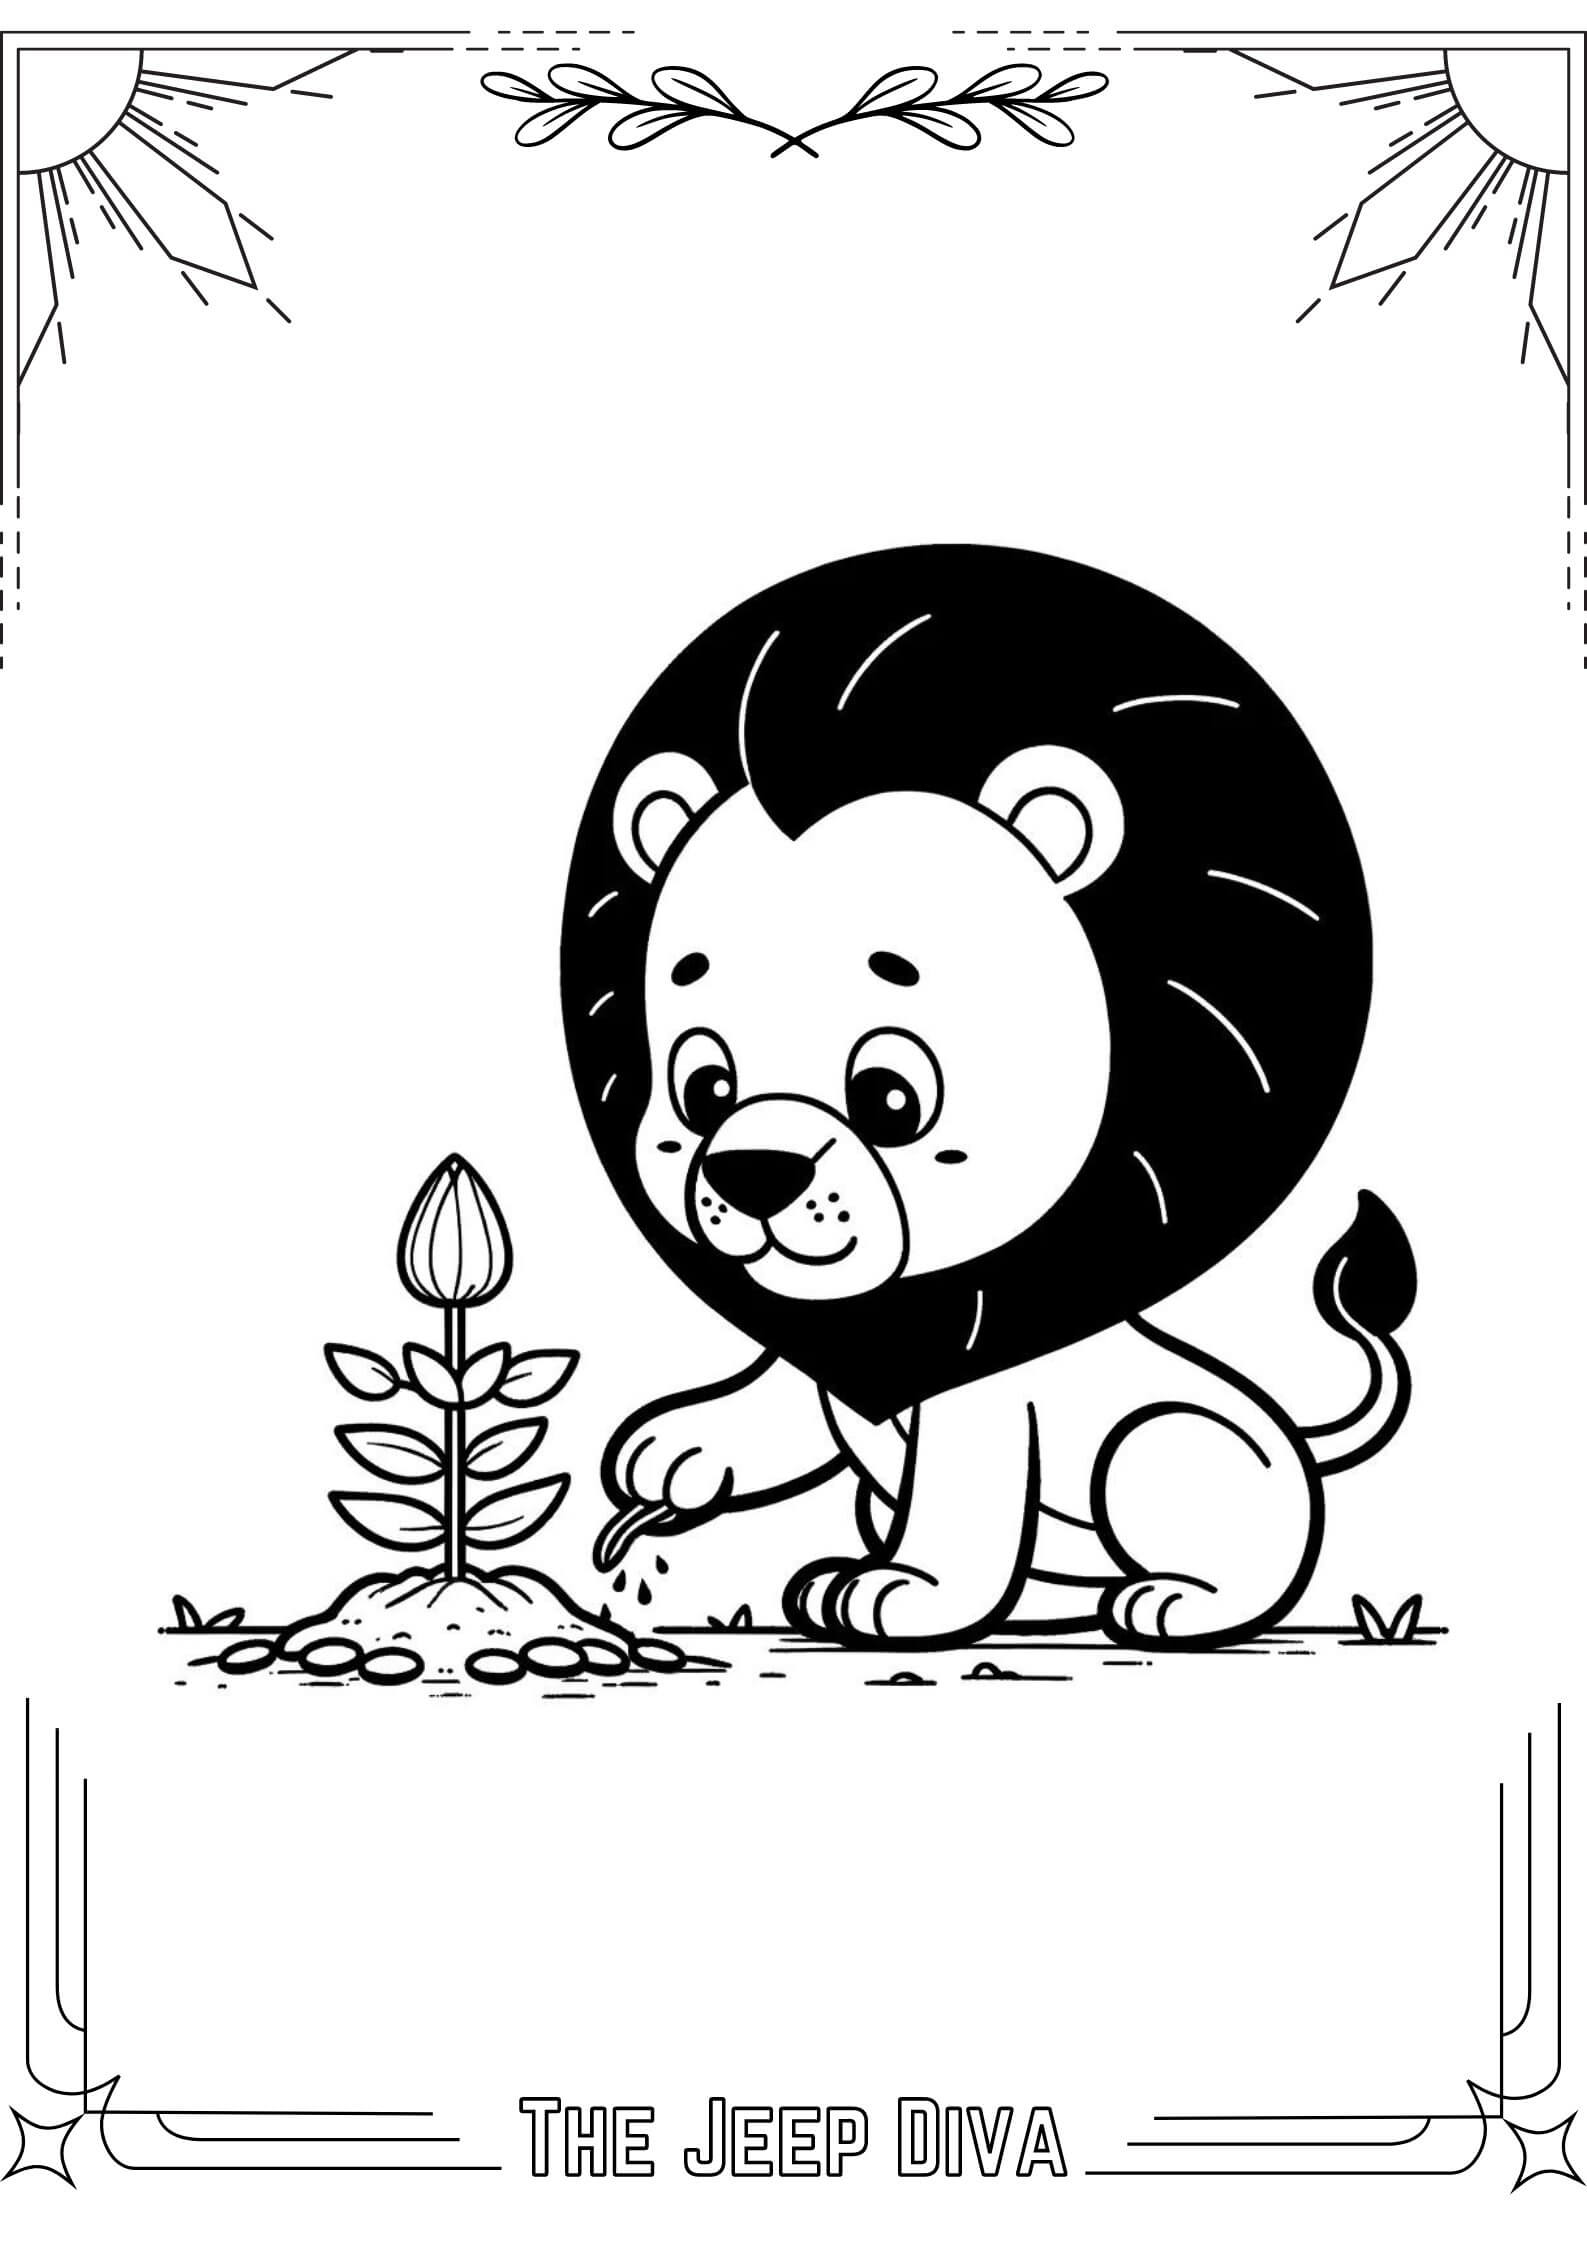 The Jeep Diva Coloring Page Lion Medium Difficulty 20